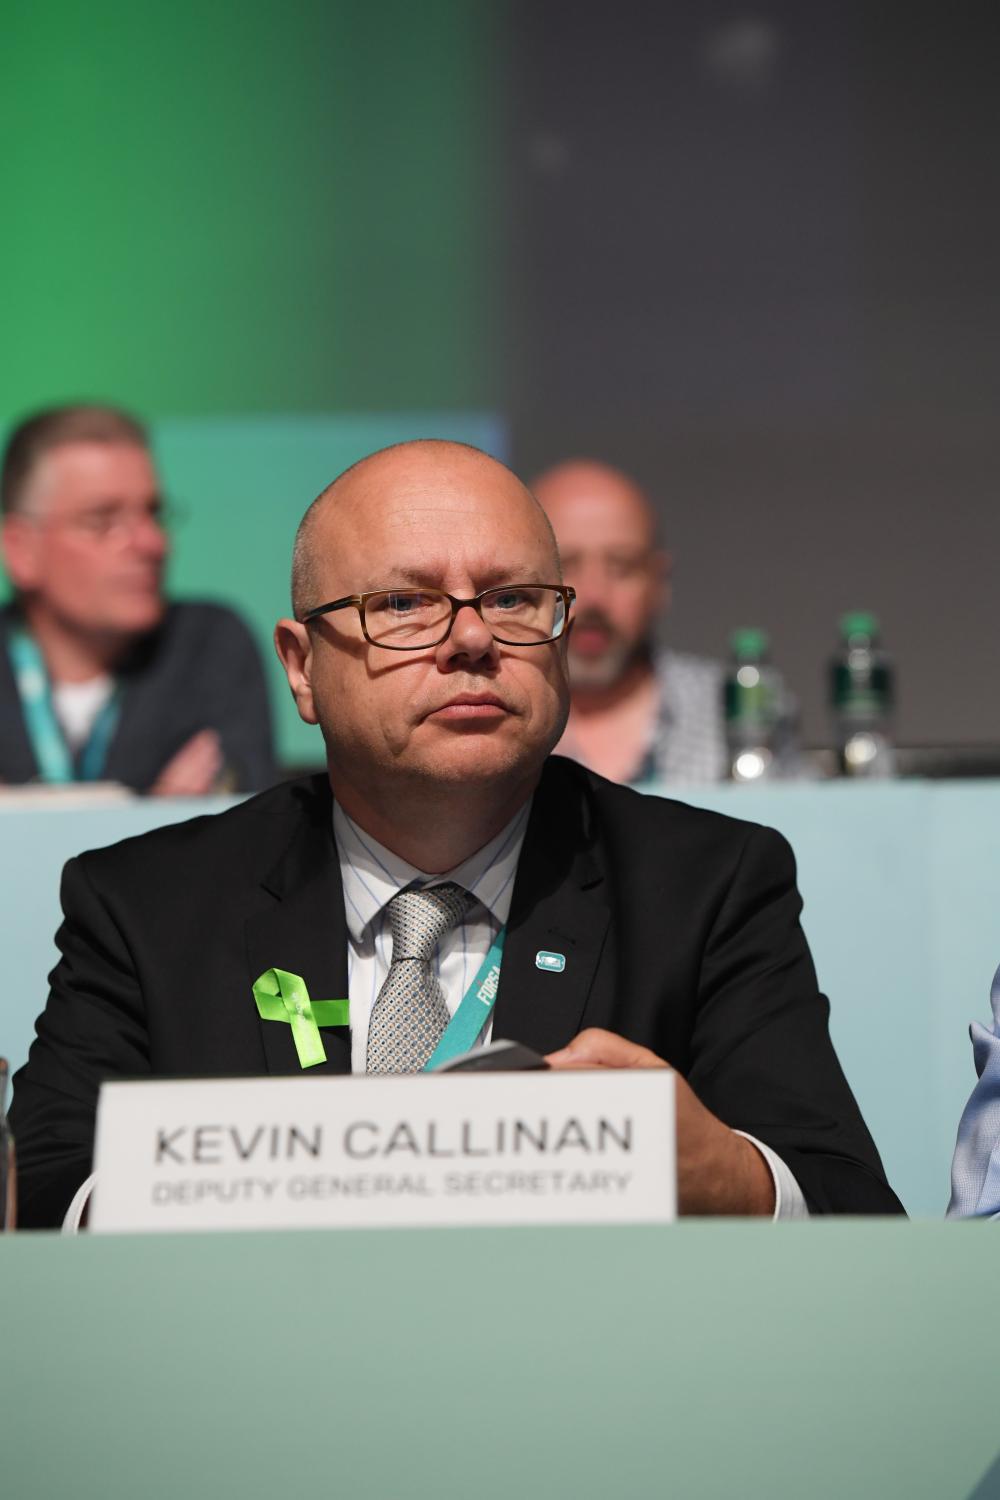 Kevin currently has responsibility for the union’s 12,000-strong Education Division, as well as the union’s extensive organising programme.